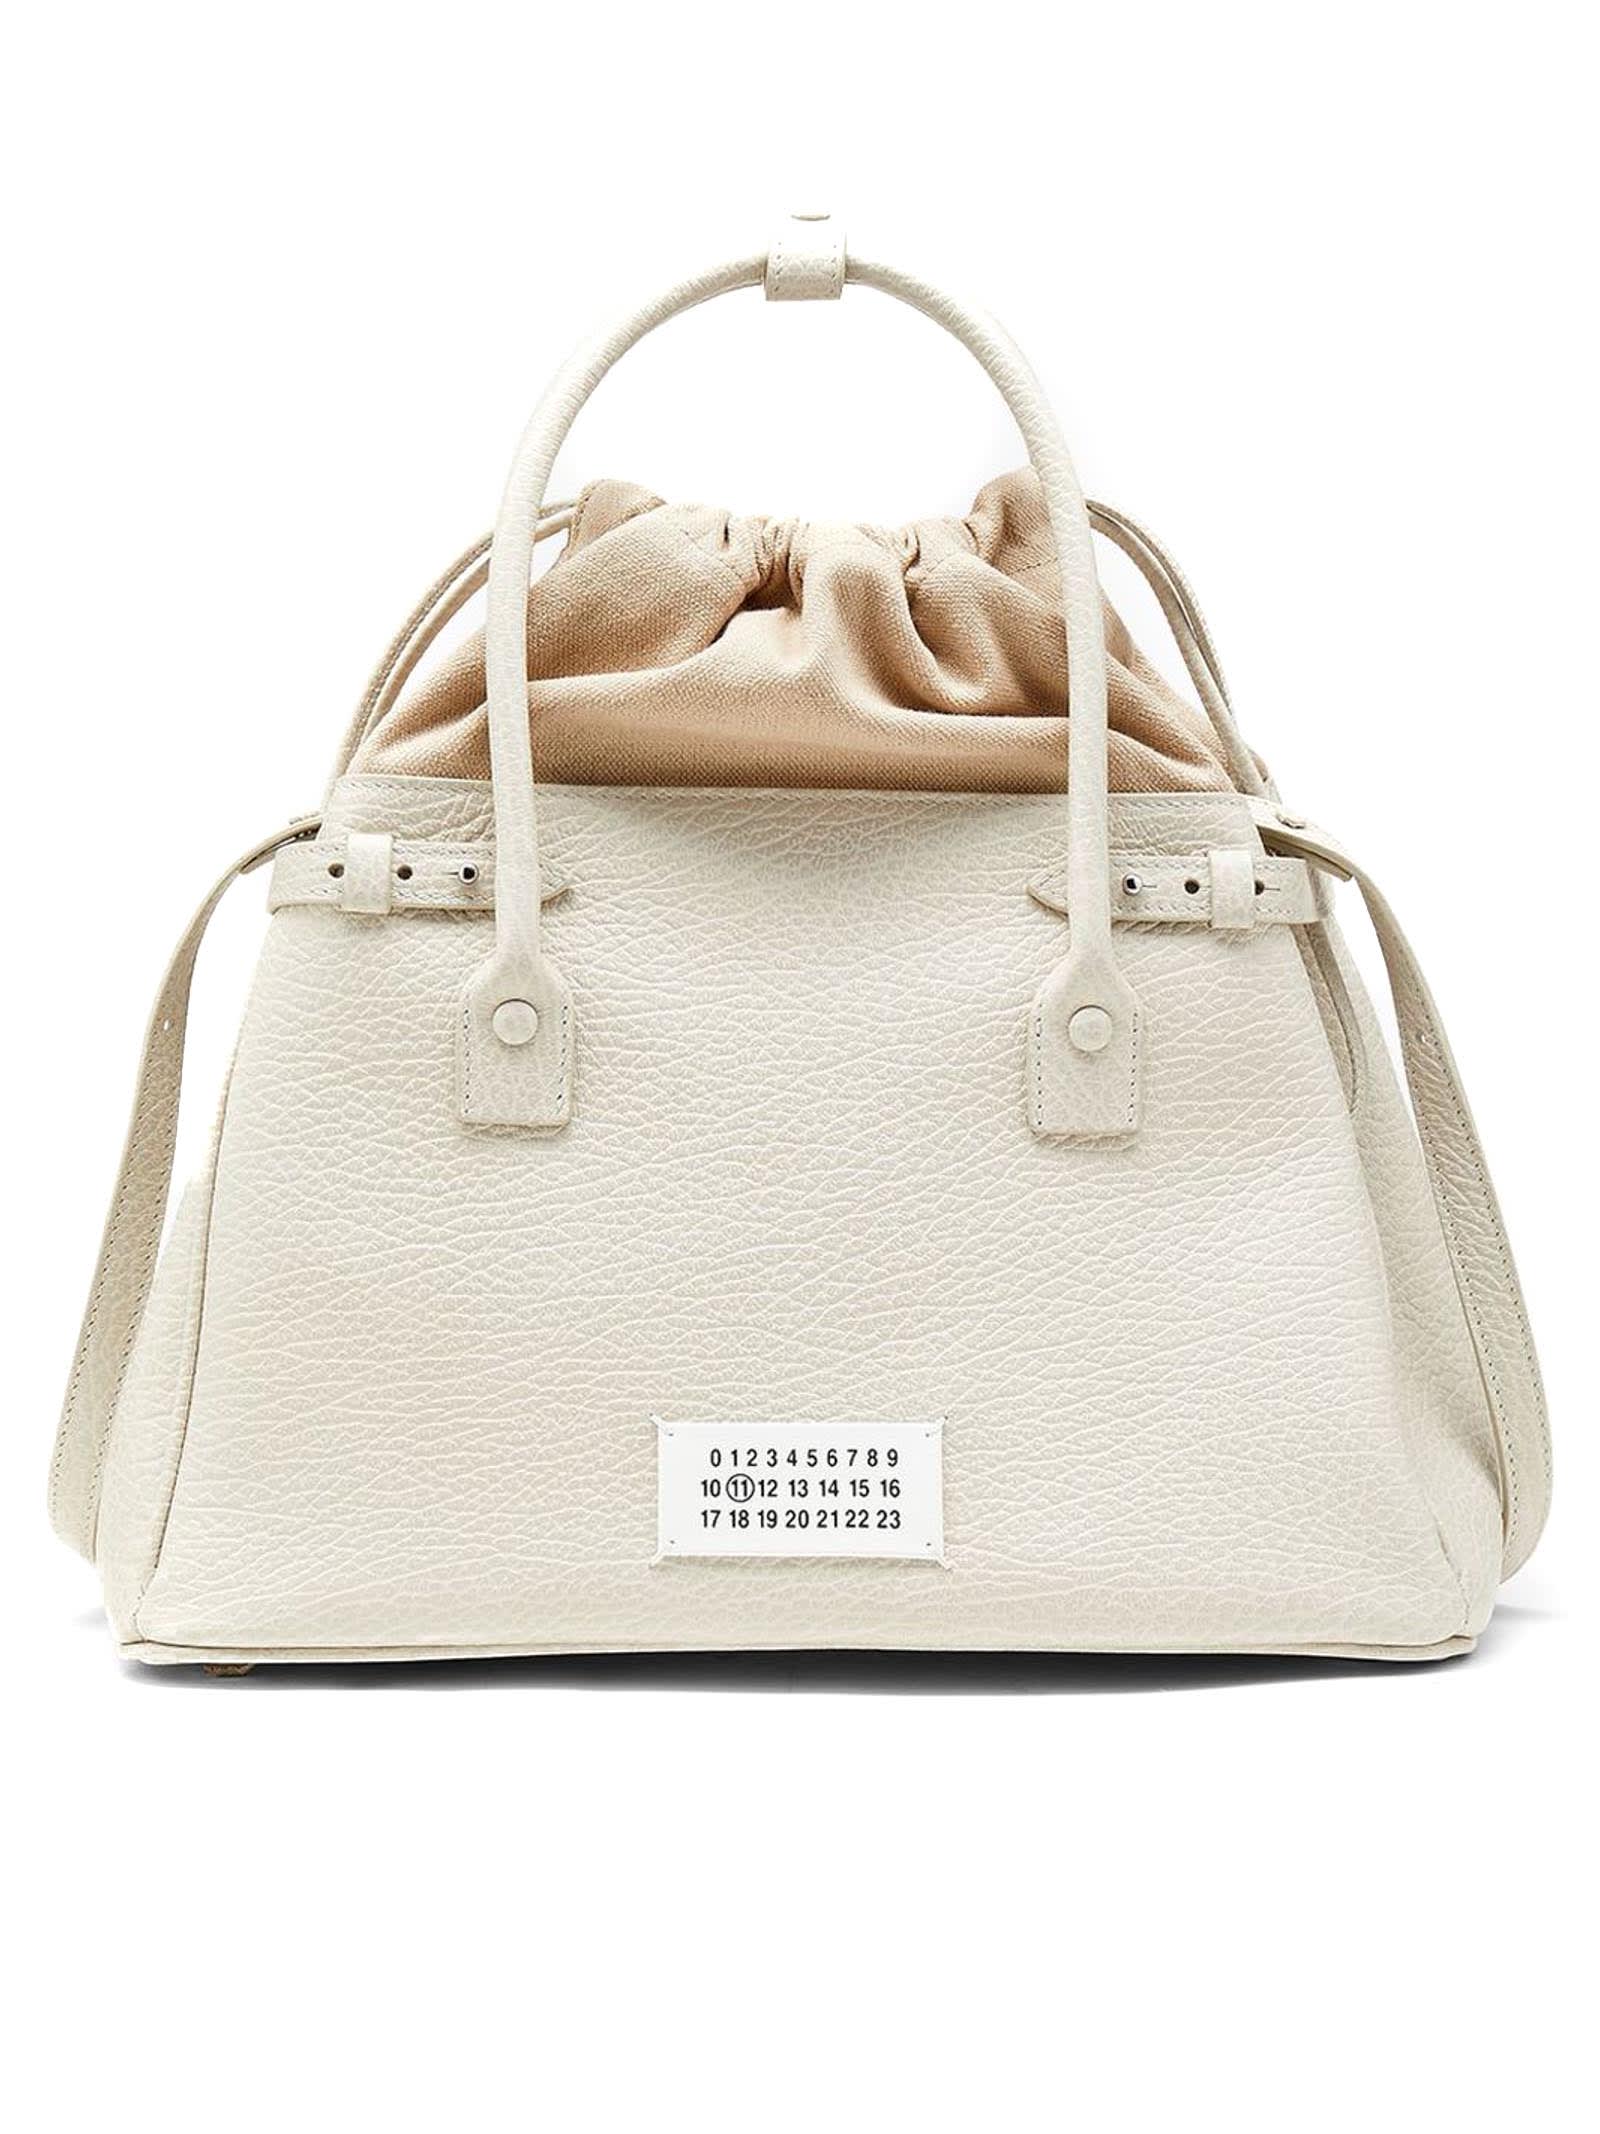 Maison Margiela 5ac Small Bag In Off-white Grainy Leather